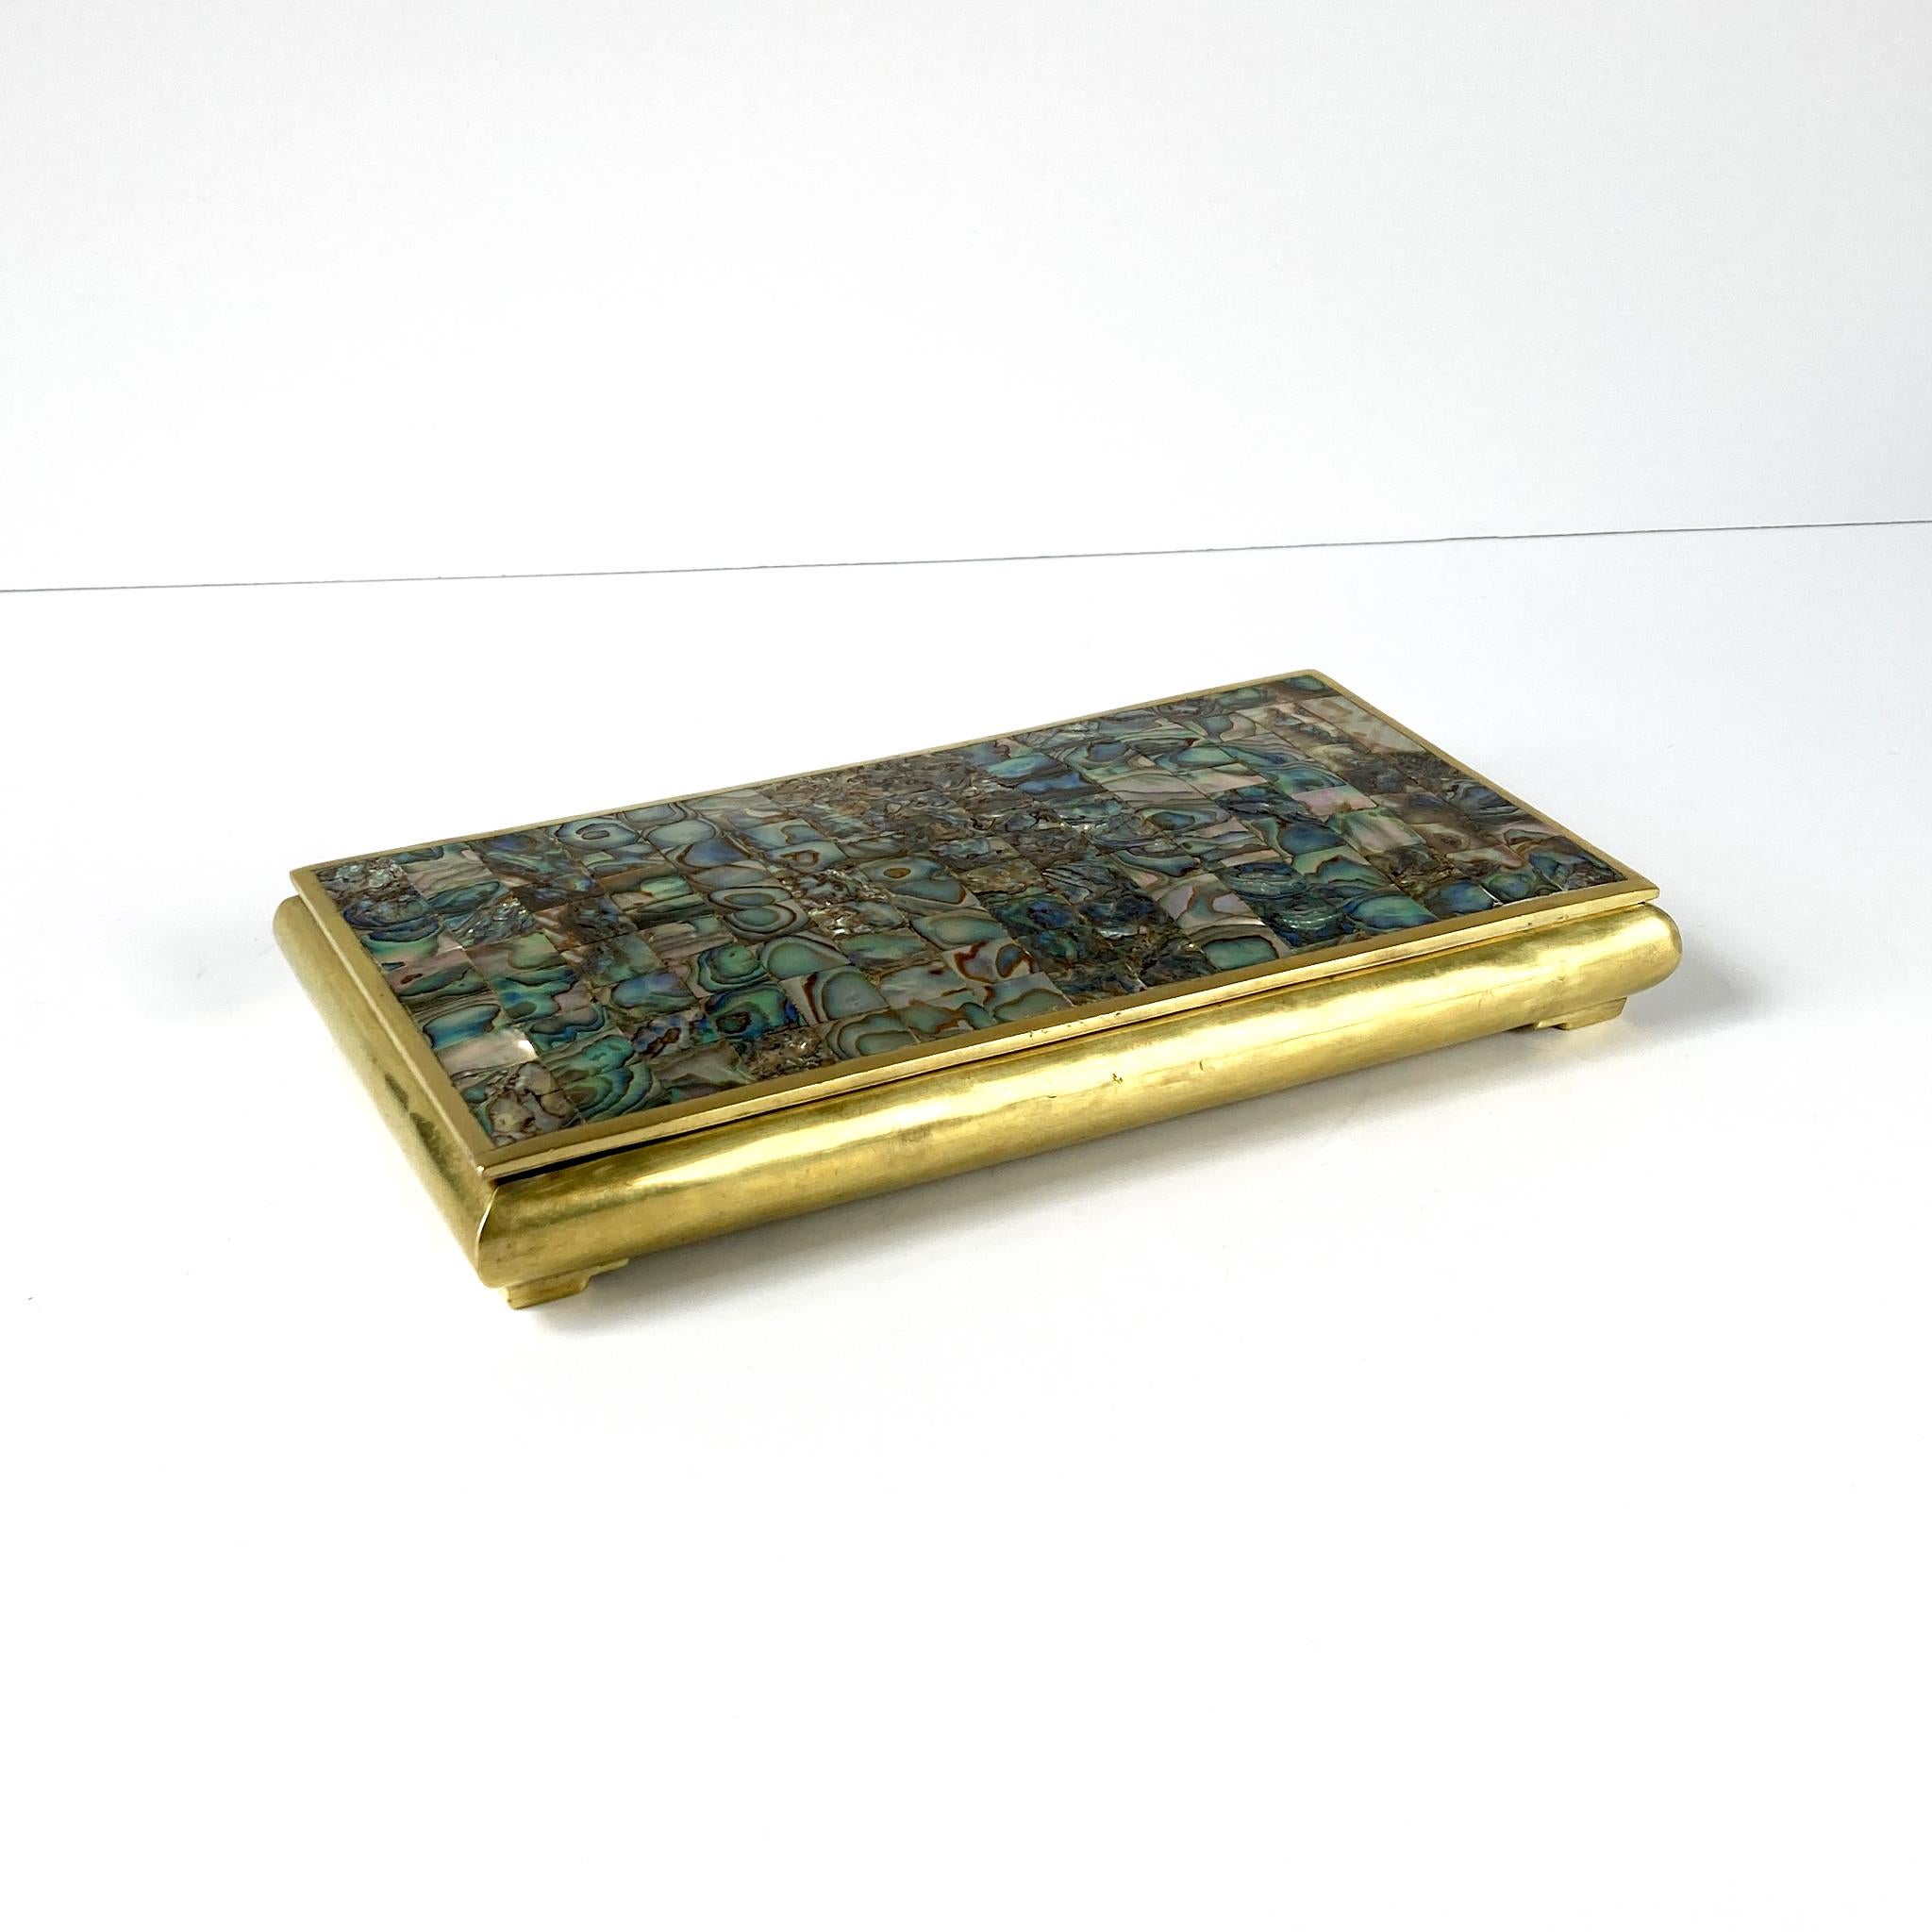 Midcentury Hinged Abalone Shell and Brass Box, Mosaic Pattern on Lid, Wood-lined For Sale 3